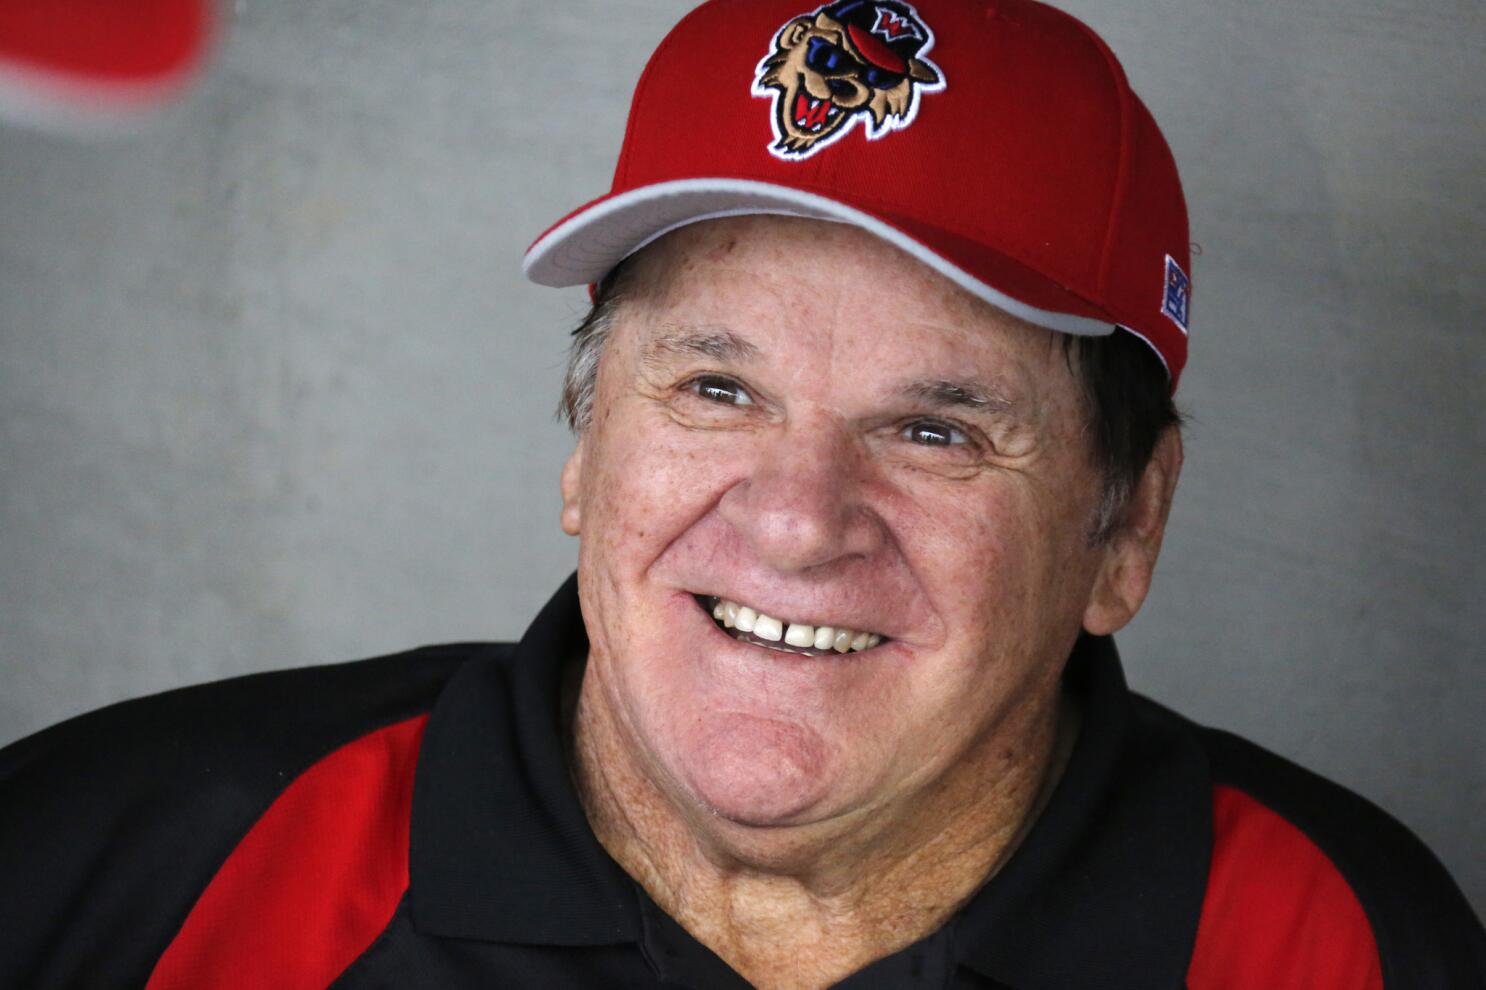 Pete Rose's reinstatement denied by MLB commissioner Rob Manfred